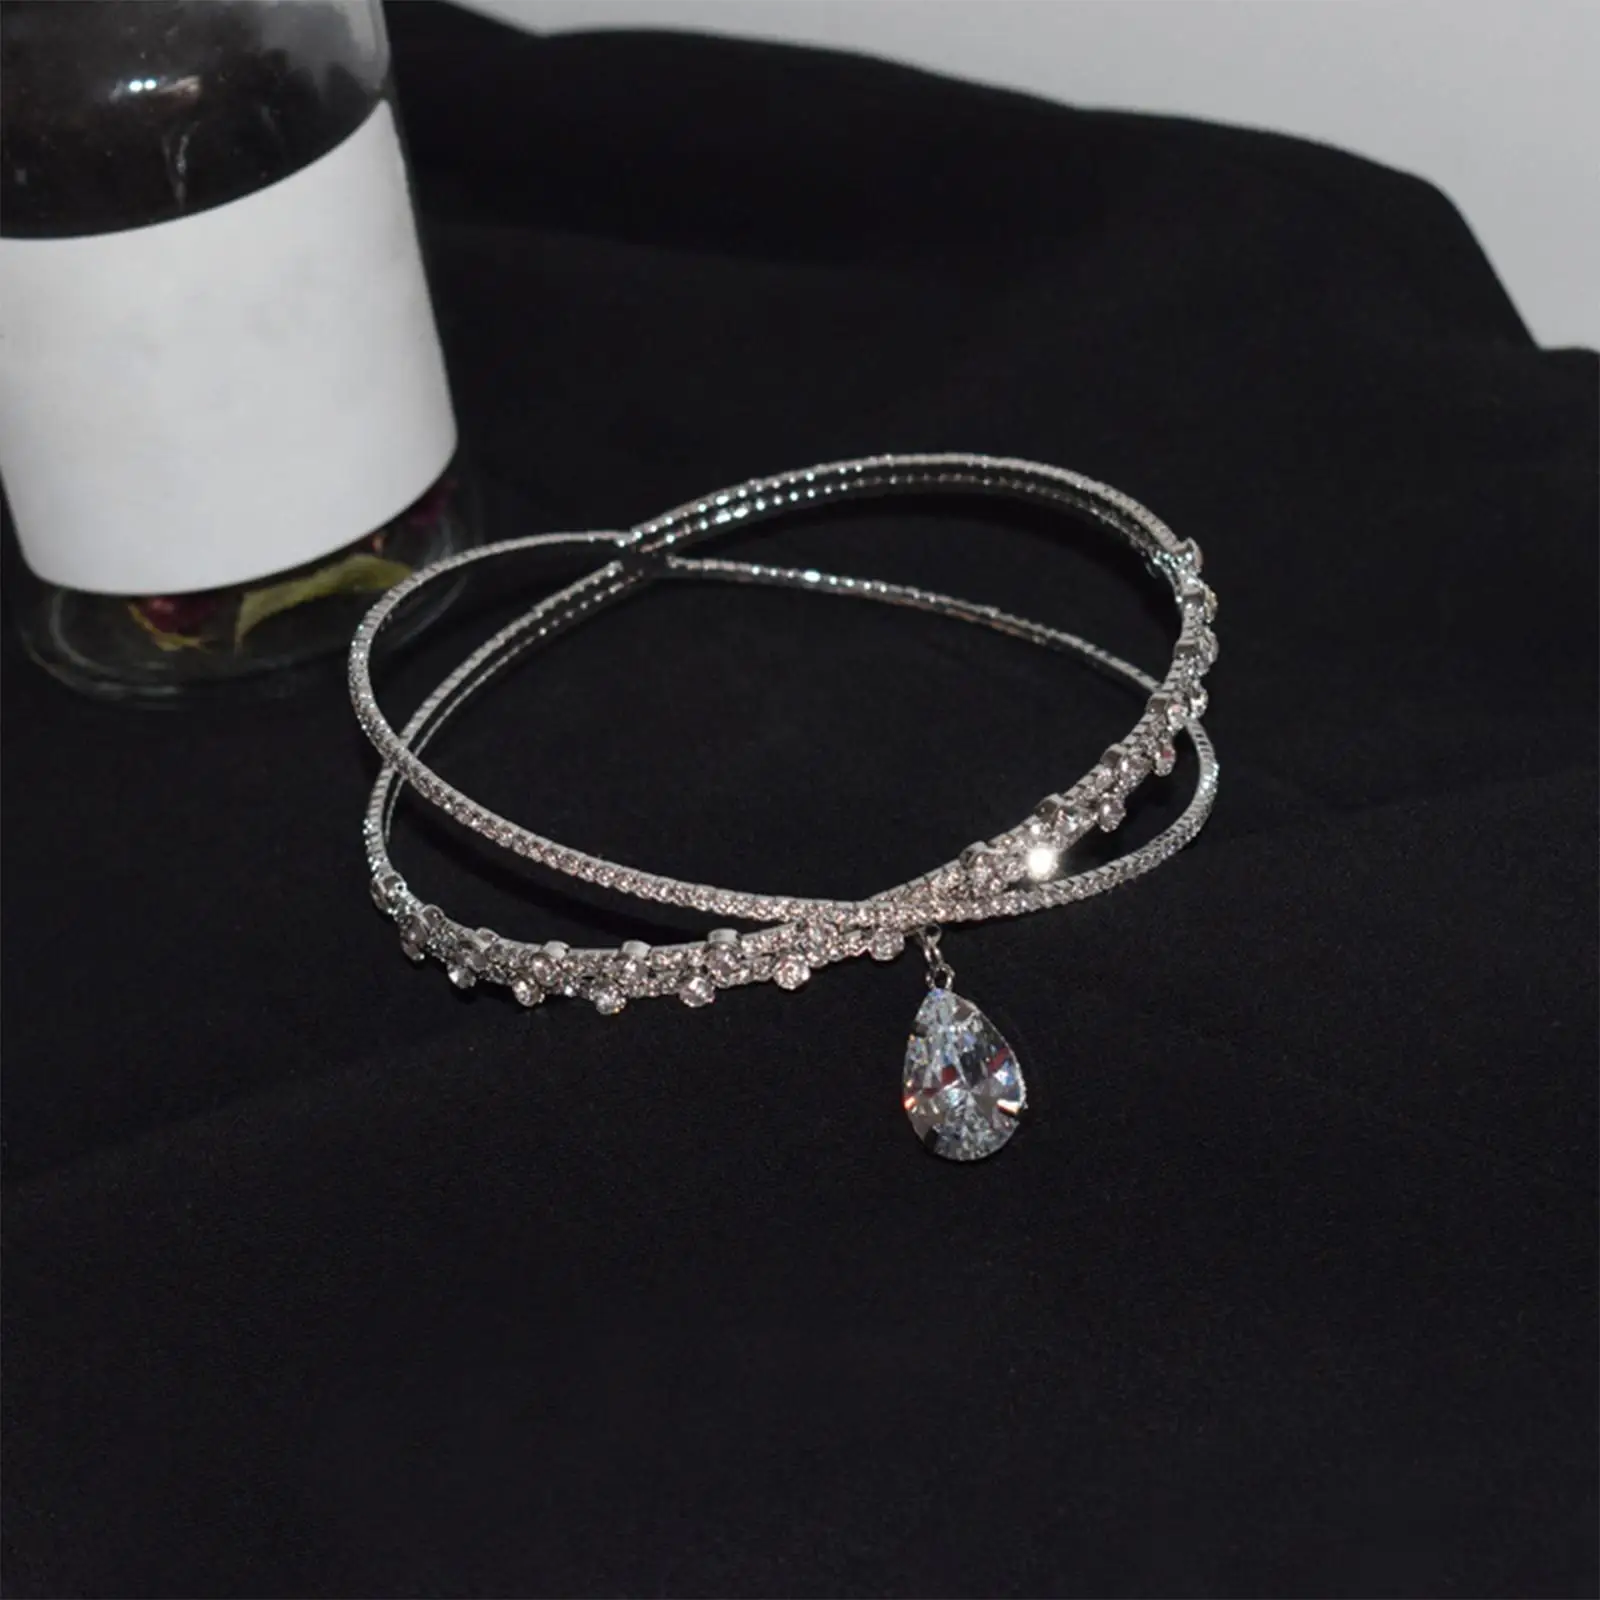 Delicate Choker Necklaces Charming Zircon Water Drop Pendant Gifts Headdress Neck Jewelry for Engagement Party Women and Girls